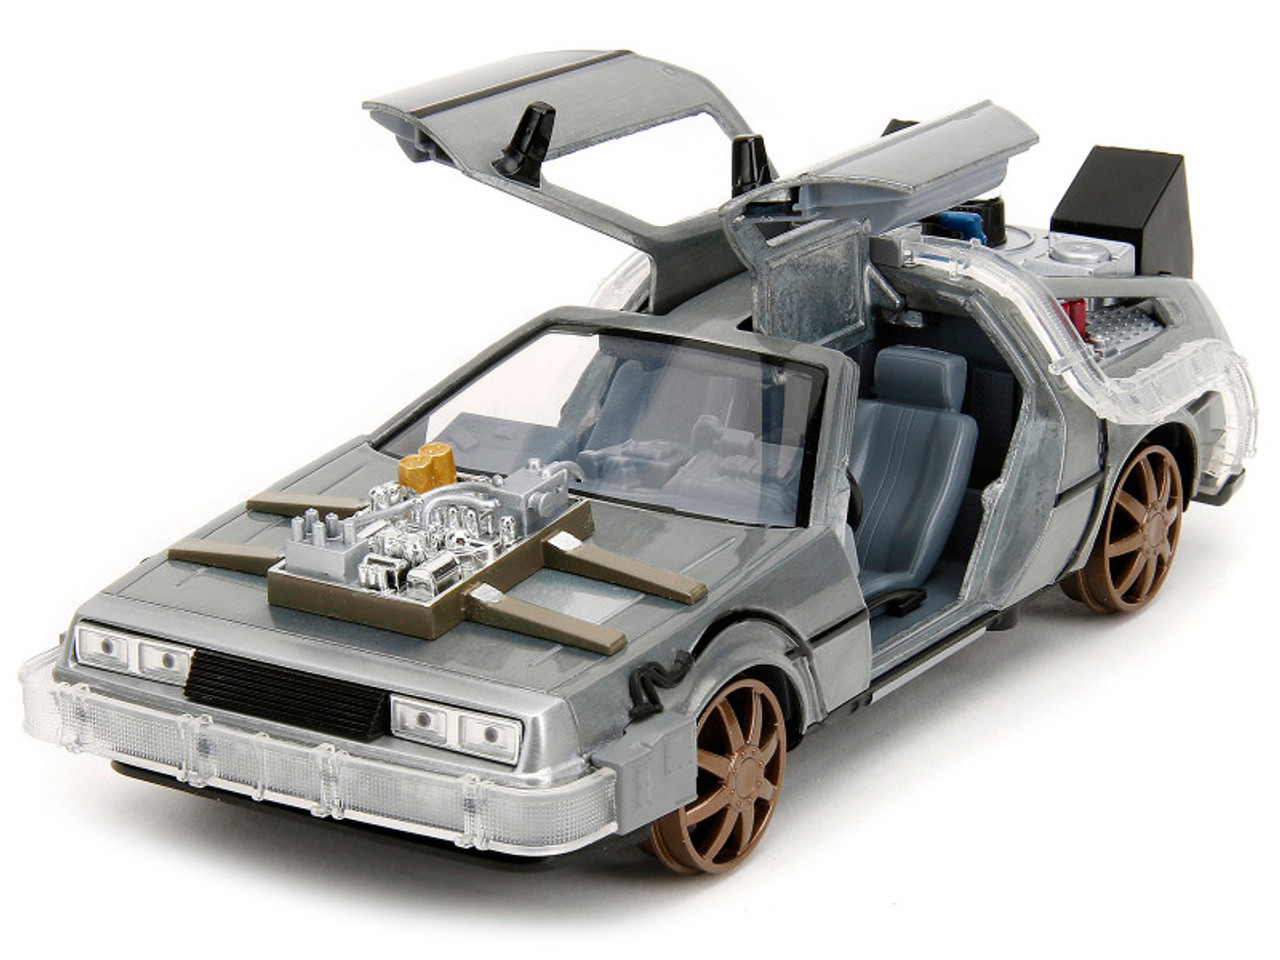 DeLorean Brushed Metal Time Machine (Train Wheel Version) with Lights "Back to the Future Part III" (1990) Movie "Hollywood Rides" Series 1/24 Diecast Model Car by Jada